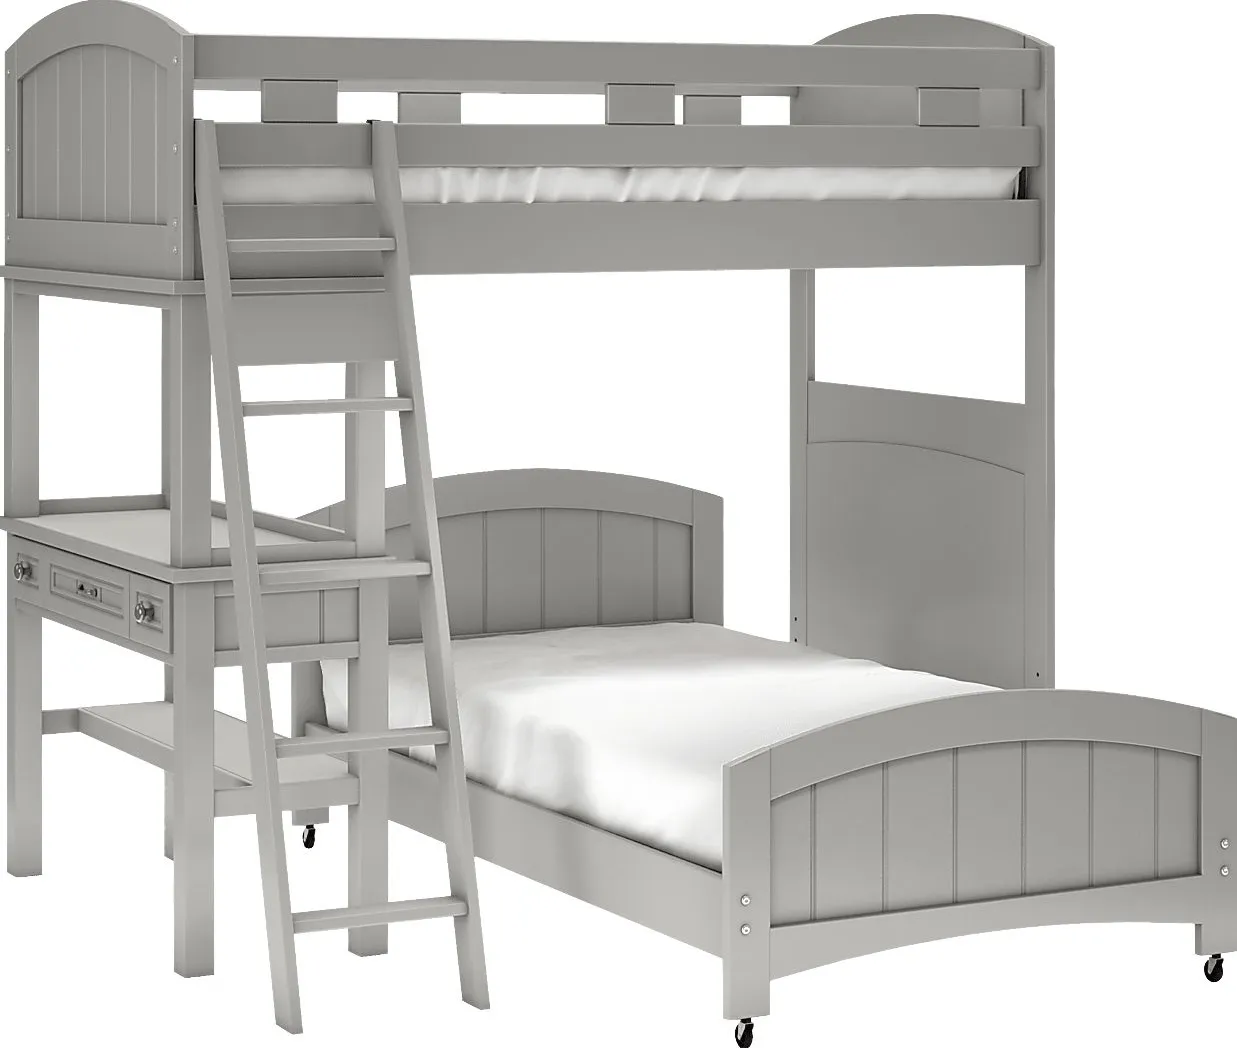 Kids Cottage Colors Gray Twin/Twin Loft Bunk Bed with Desk